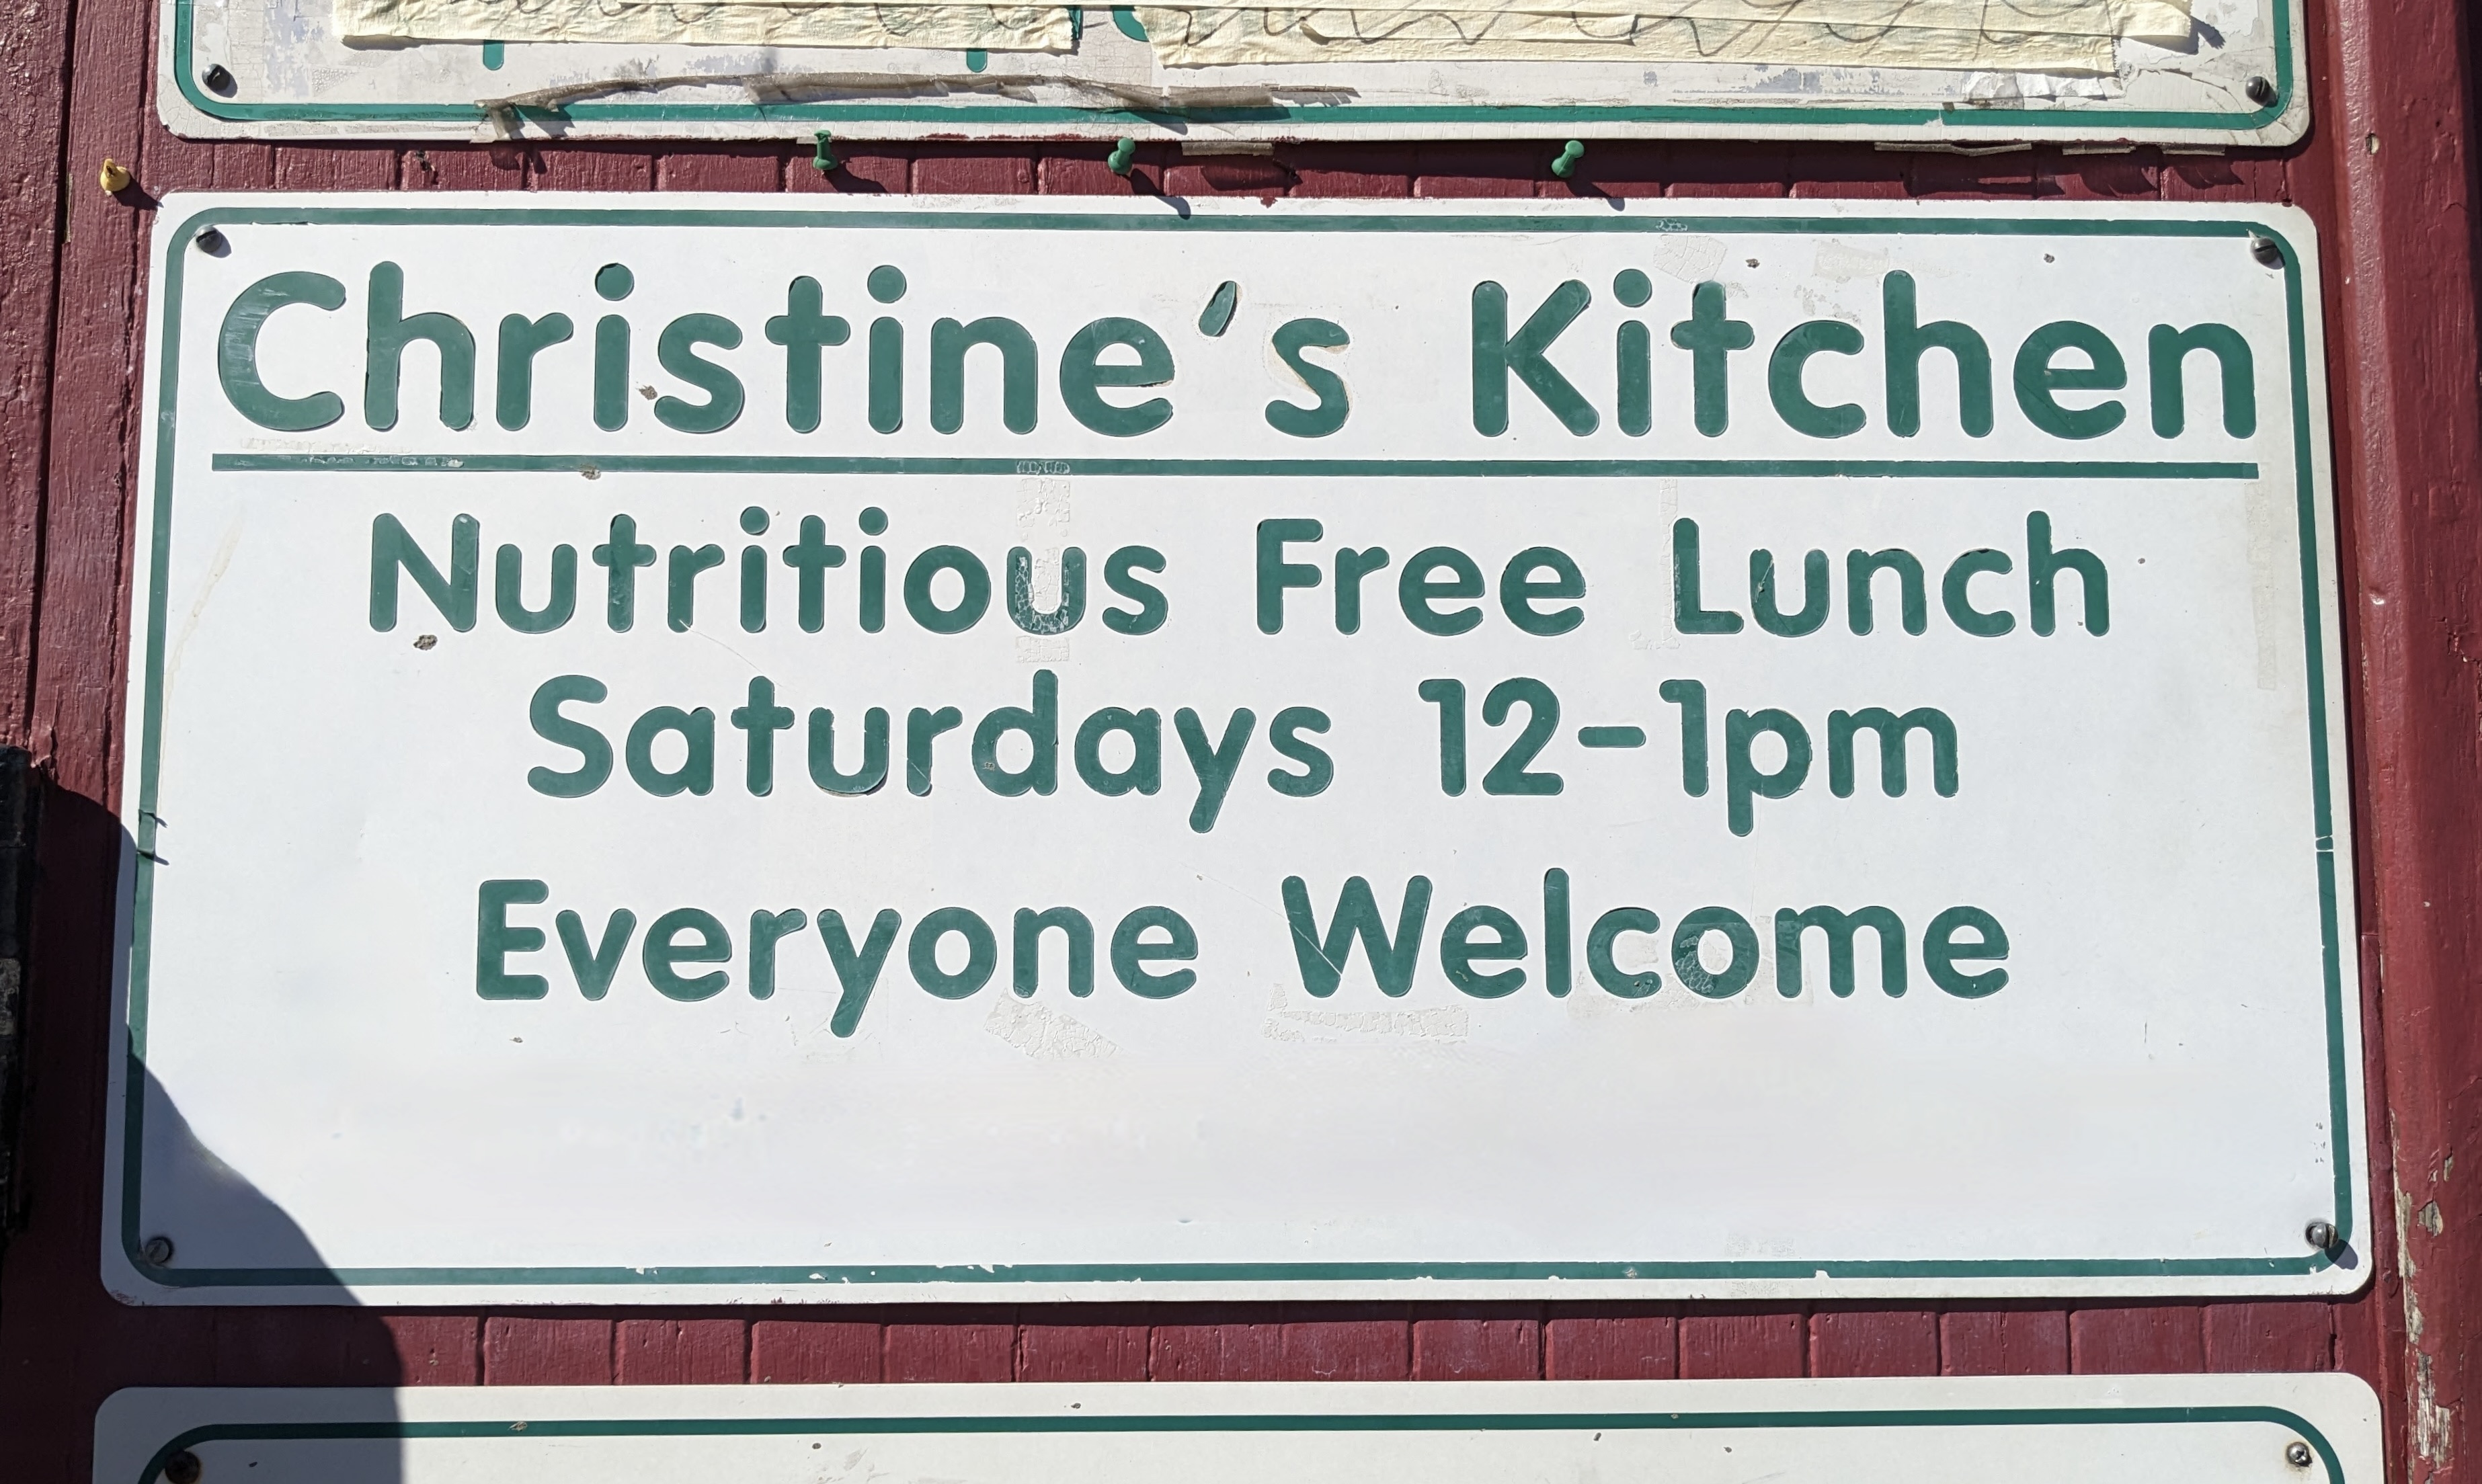 A sign of Christine's Kitchen